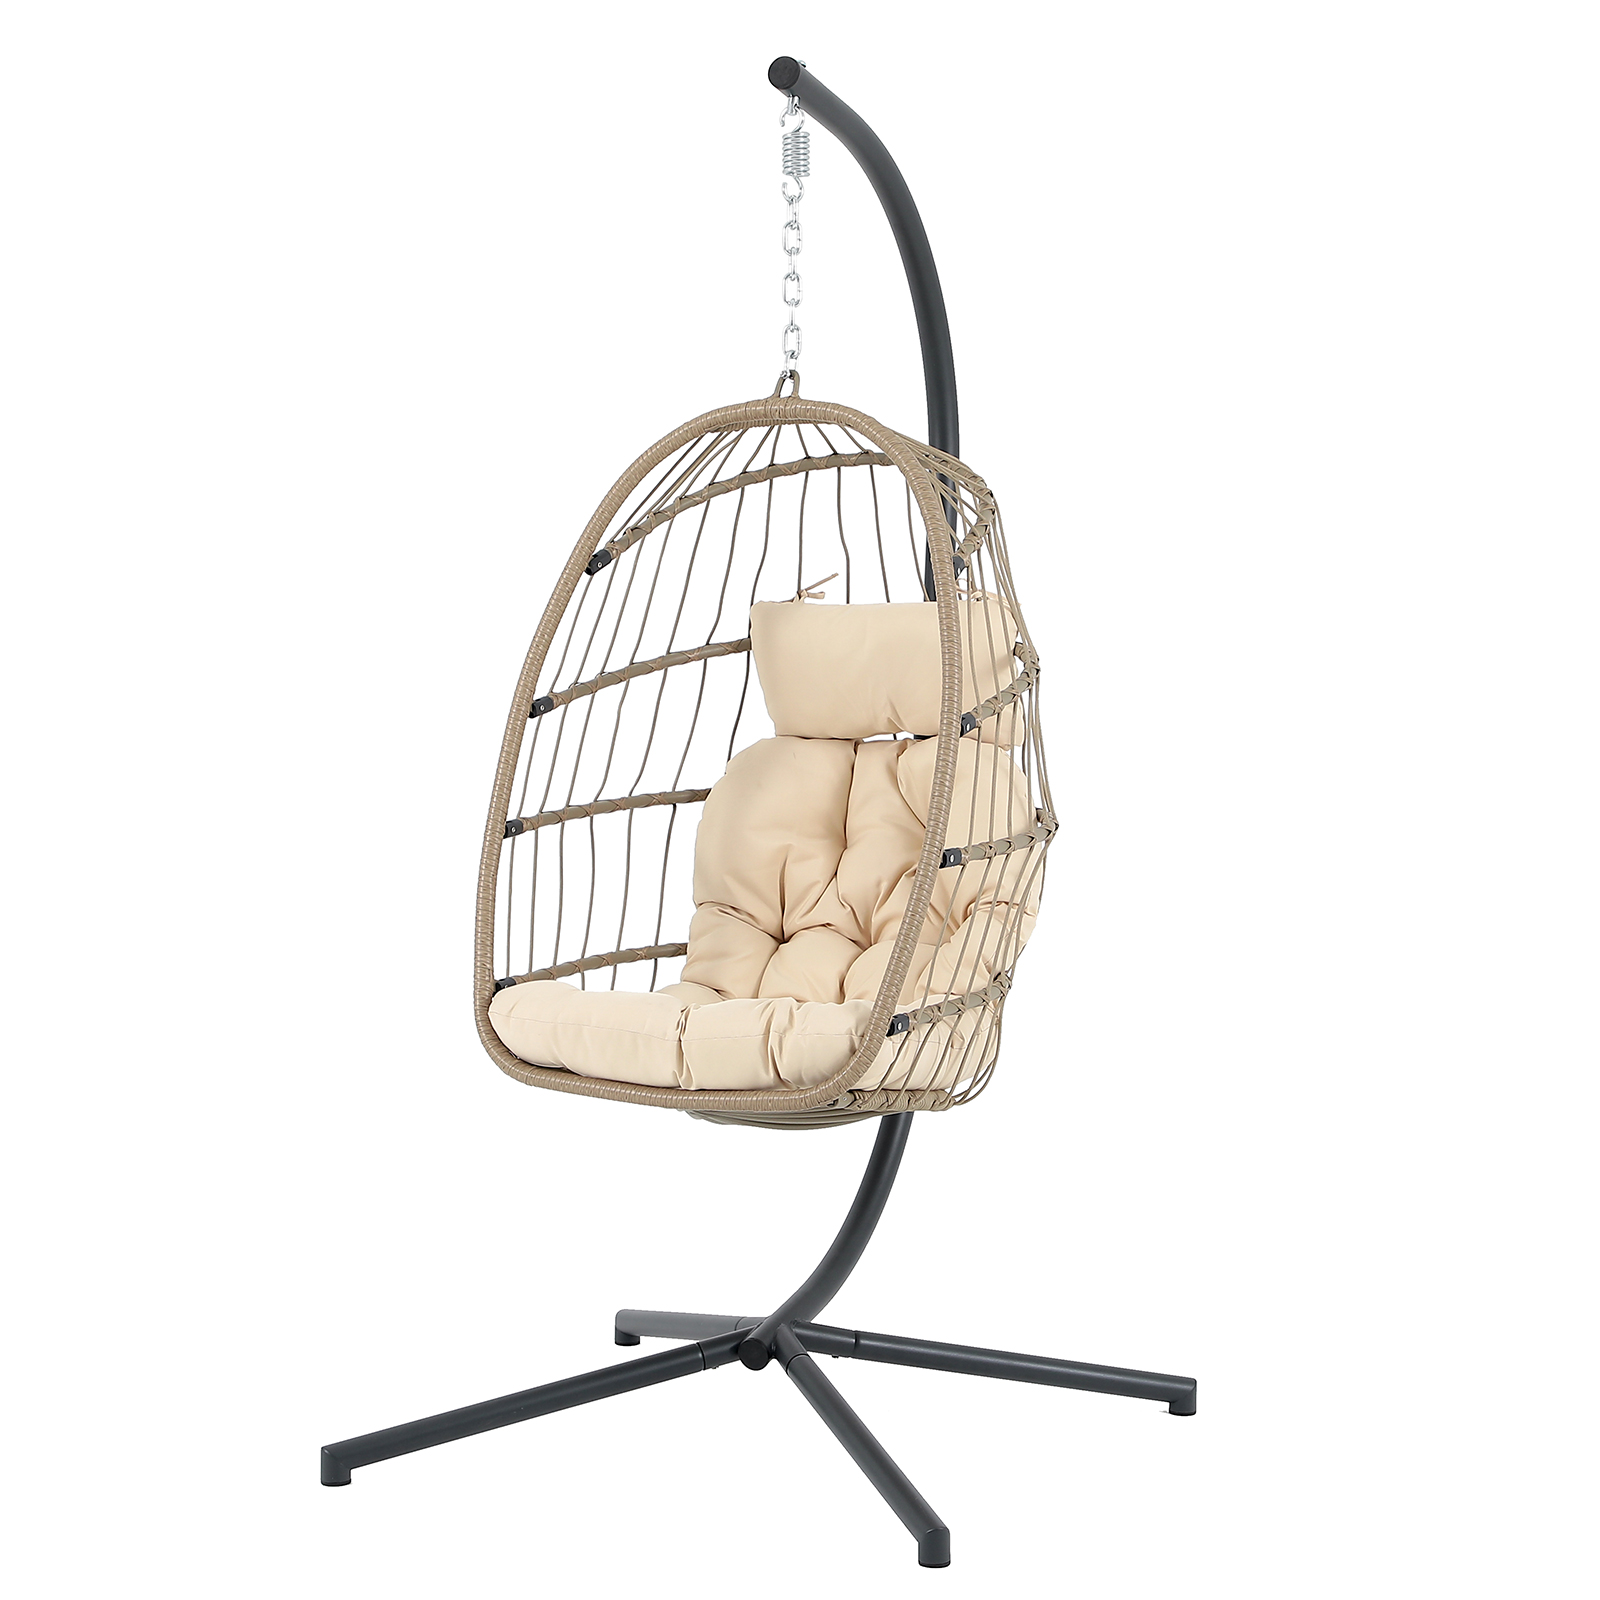 Steel Hanging Egg Chair with Stand Beige Outdoor Patio Swing Chair